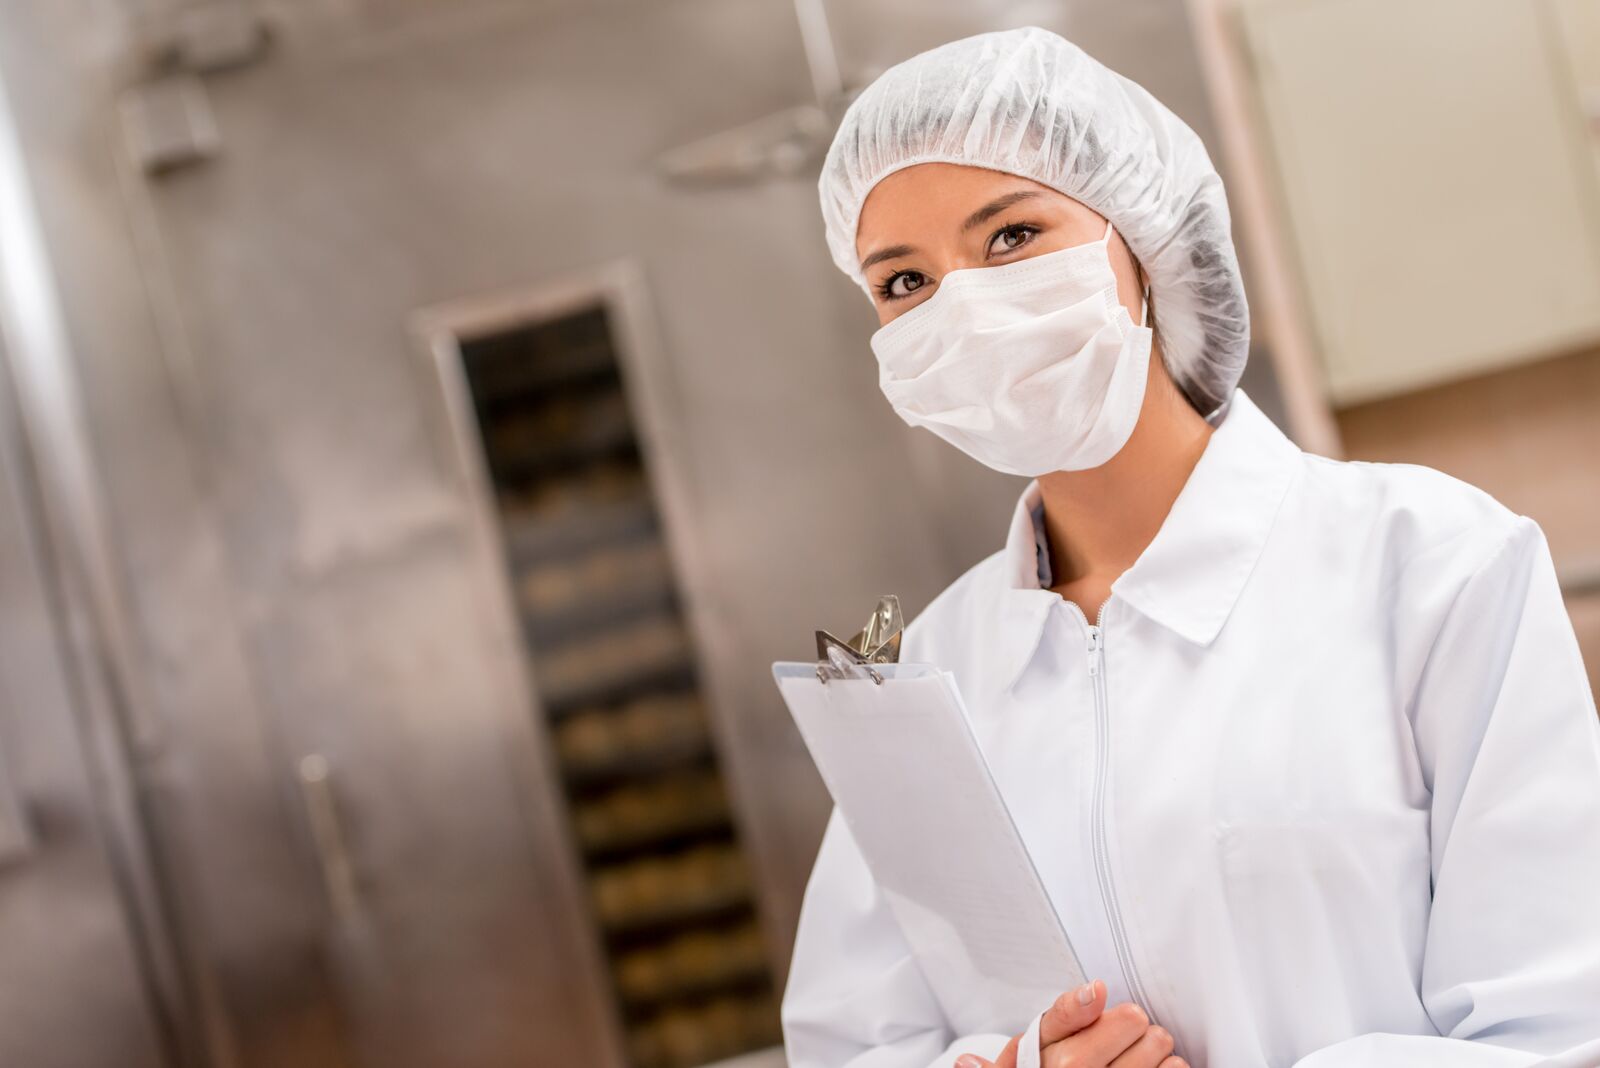 FDA Training GMP Auditing for Quality Assurance Training Course for FDA Regulated Industries